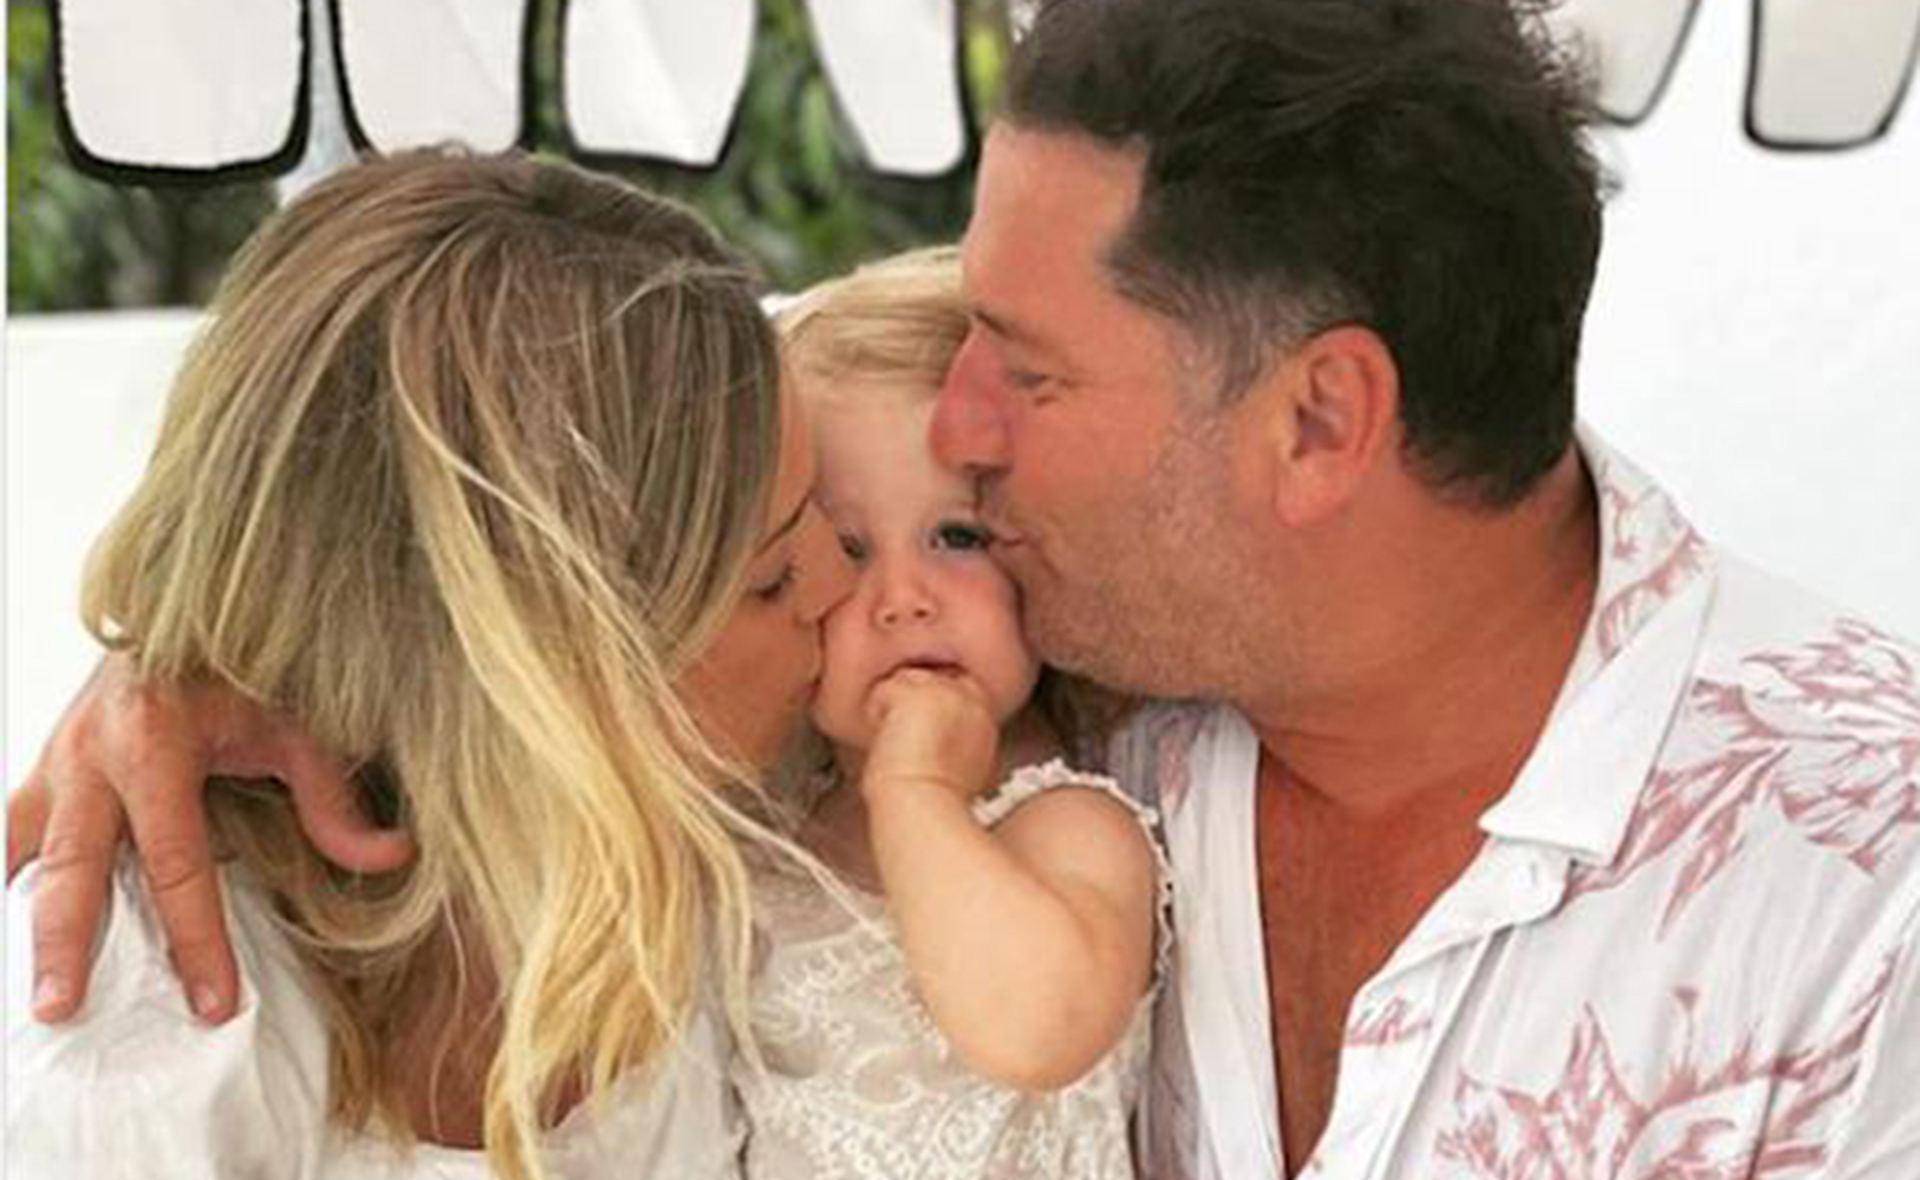 “It’s been a terrible year”: Karl Stefanovic shares his daughter Harper’s health battle